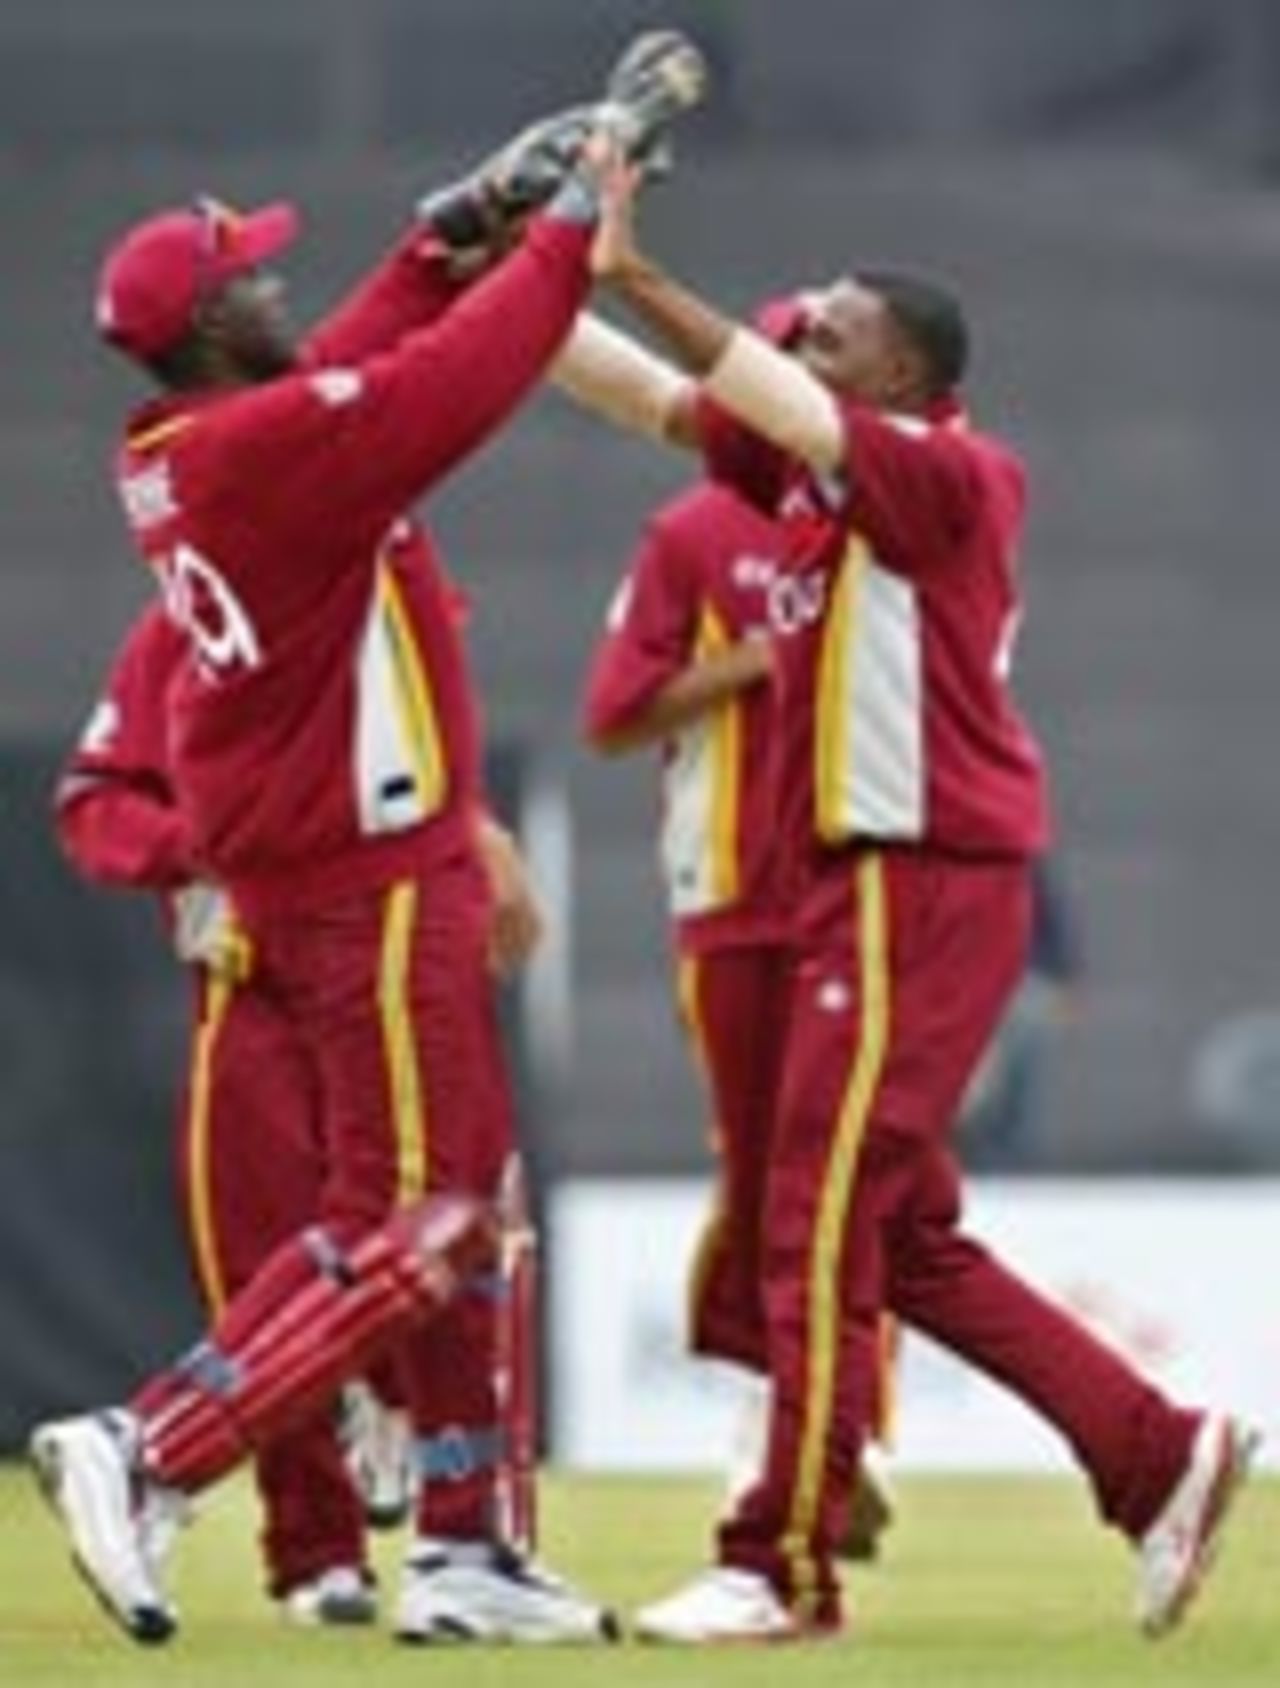 Courtney Browne and Dwayne Bravo celebrate the wicket of Inzamam-ul-Haq, West Indies v Pakistan, ICC Champions Trophy, September 22 2004